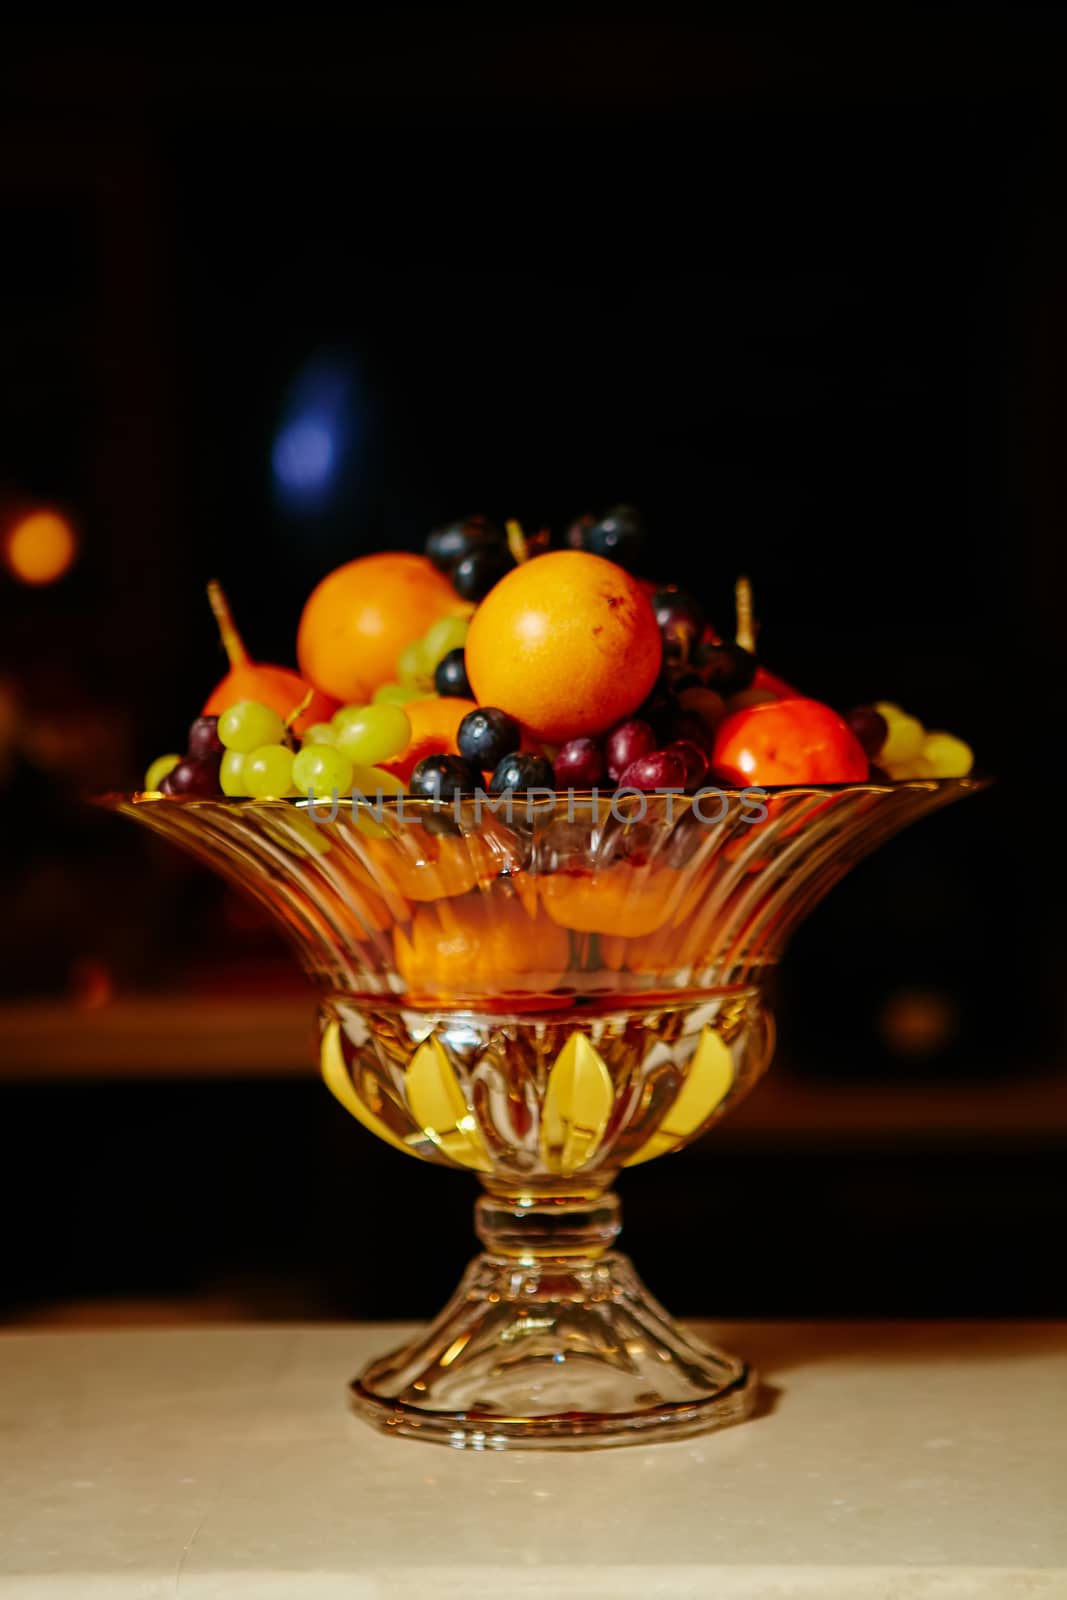 Assortment of juicy fruits on wooden table, by sarymsakov